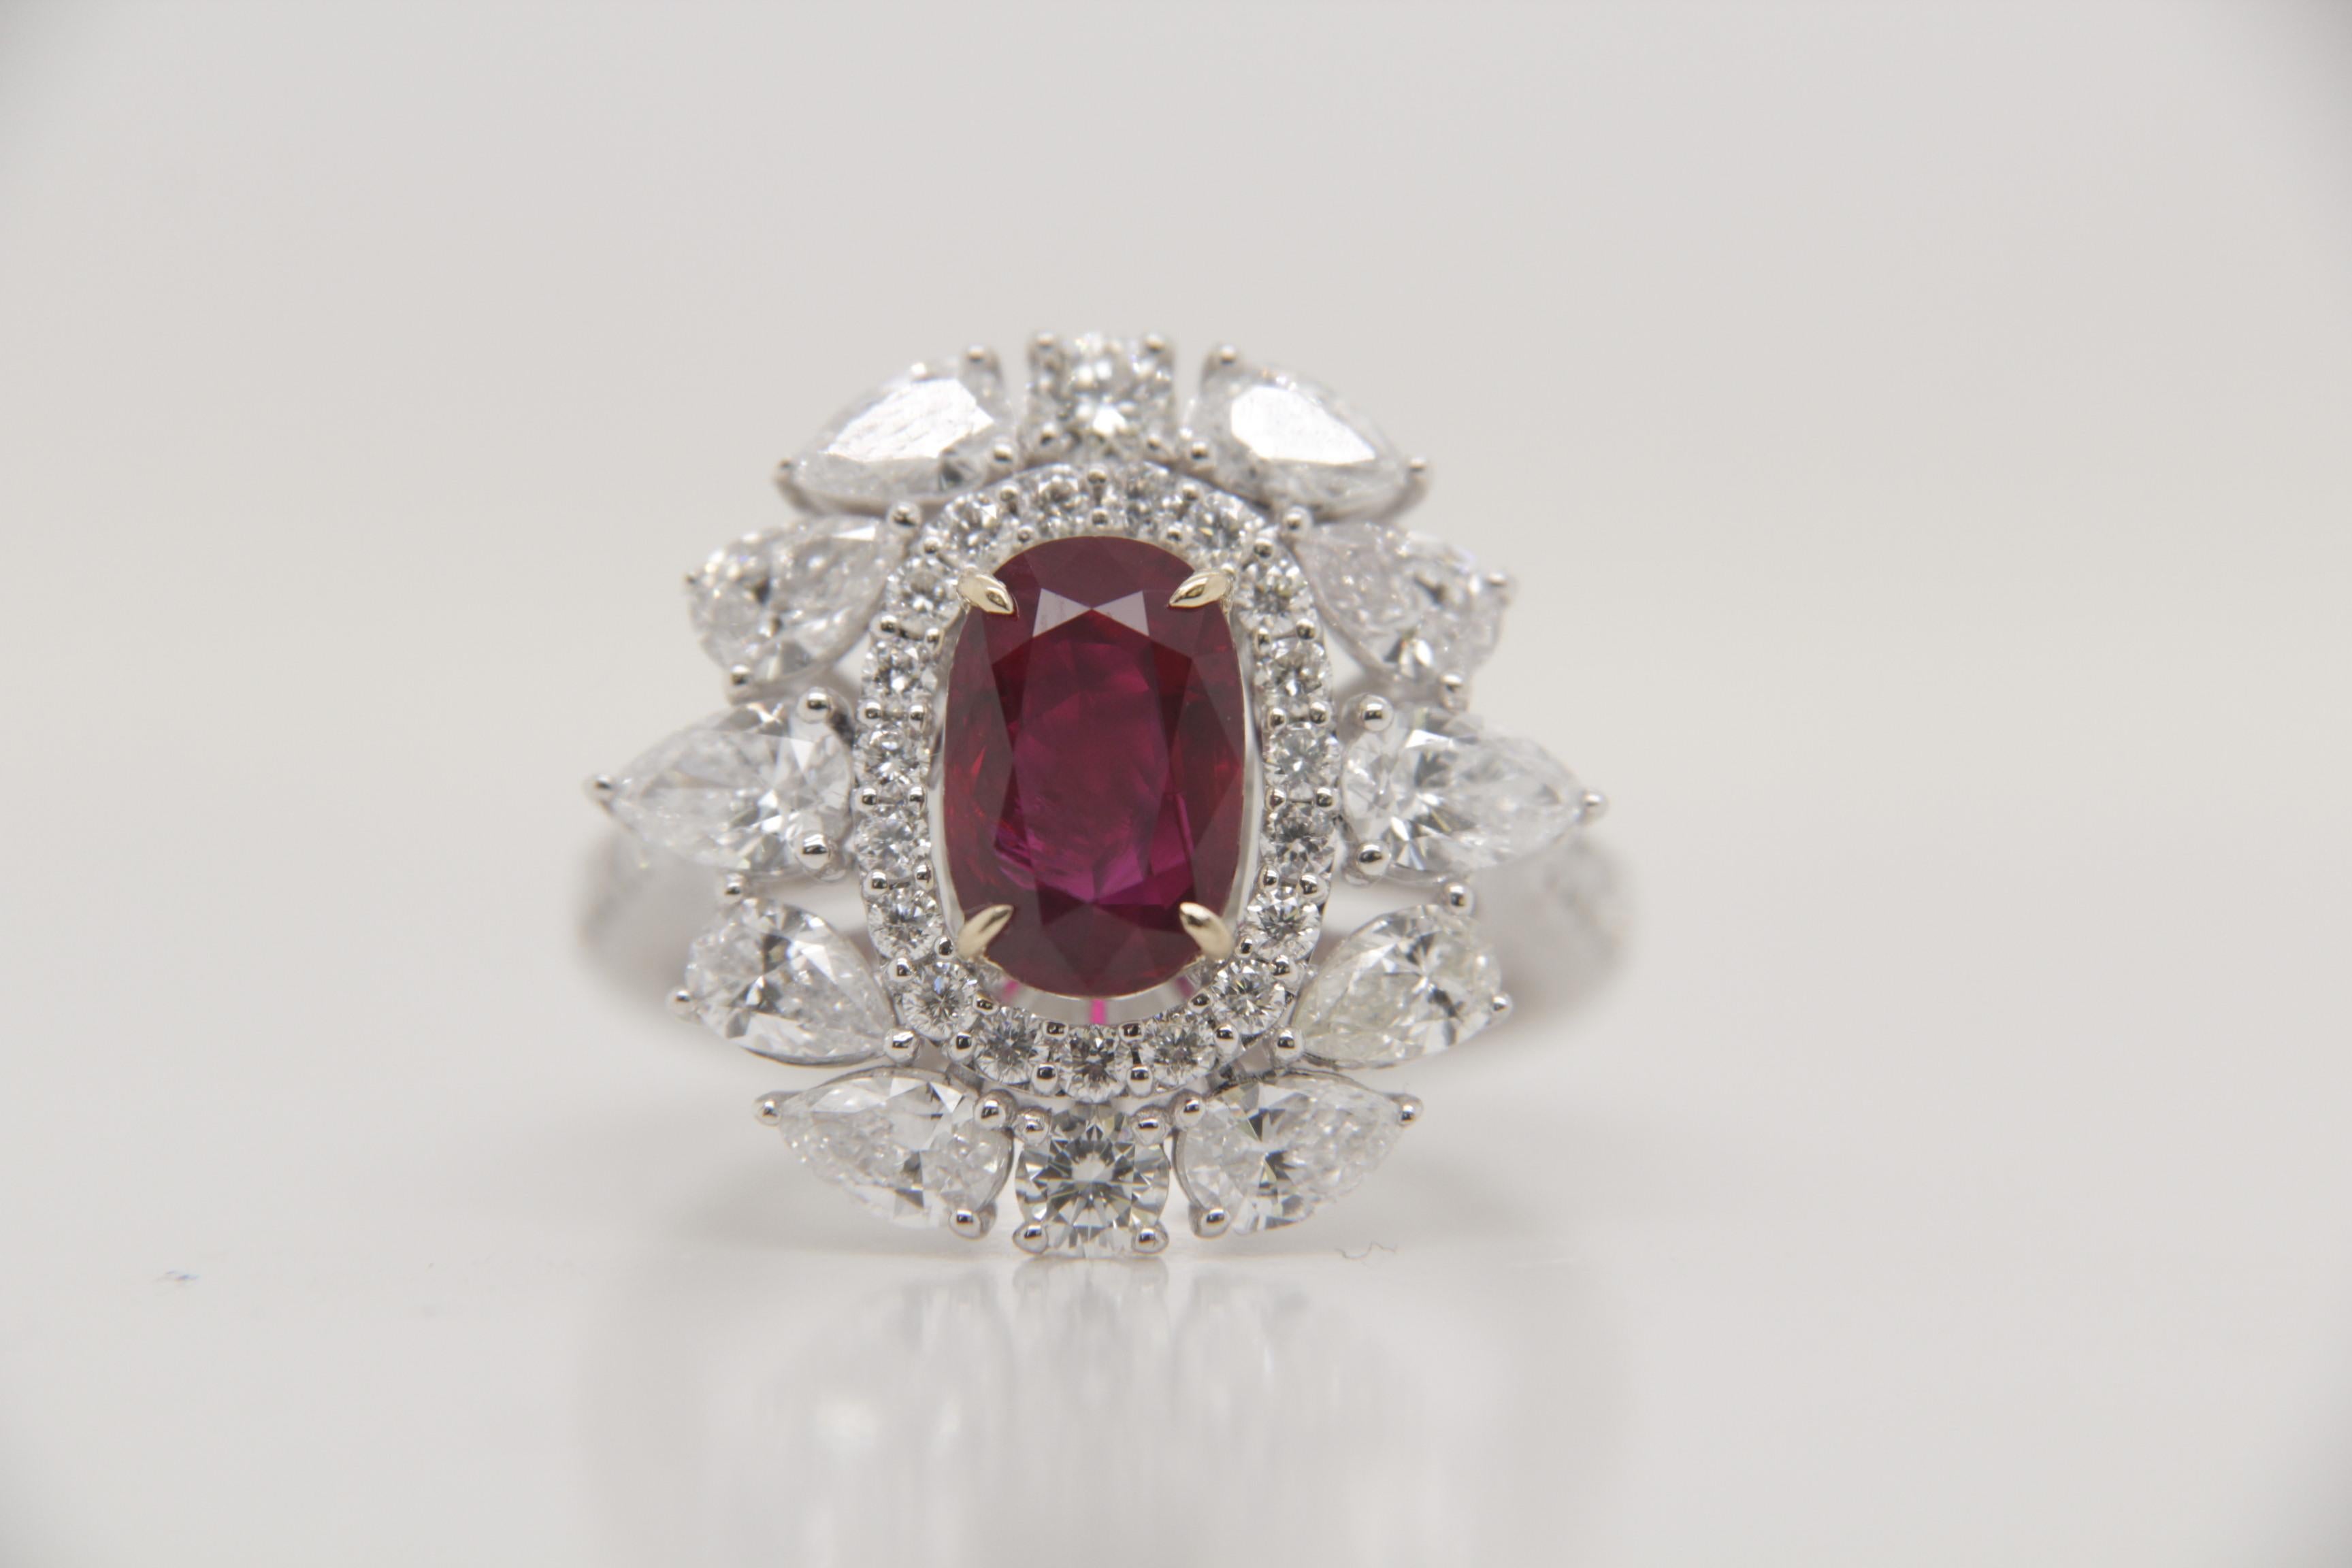 A brand new handcrafted ruby ring by Rewa Jewels. The ring's center stone is 2.04 carat Burmese ruby certified by Gem Research Swisslab (GRS) as natural, unheated, 'Pigeon blood' with the certificate number: 2023-071040. The centre ruby has been set